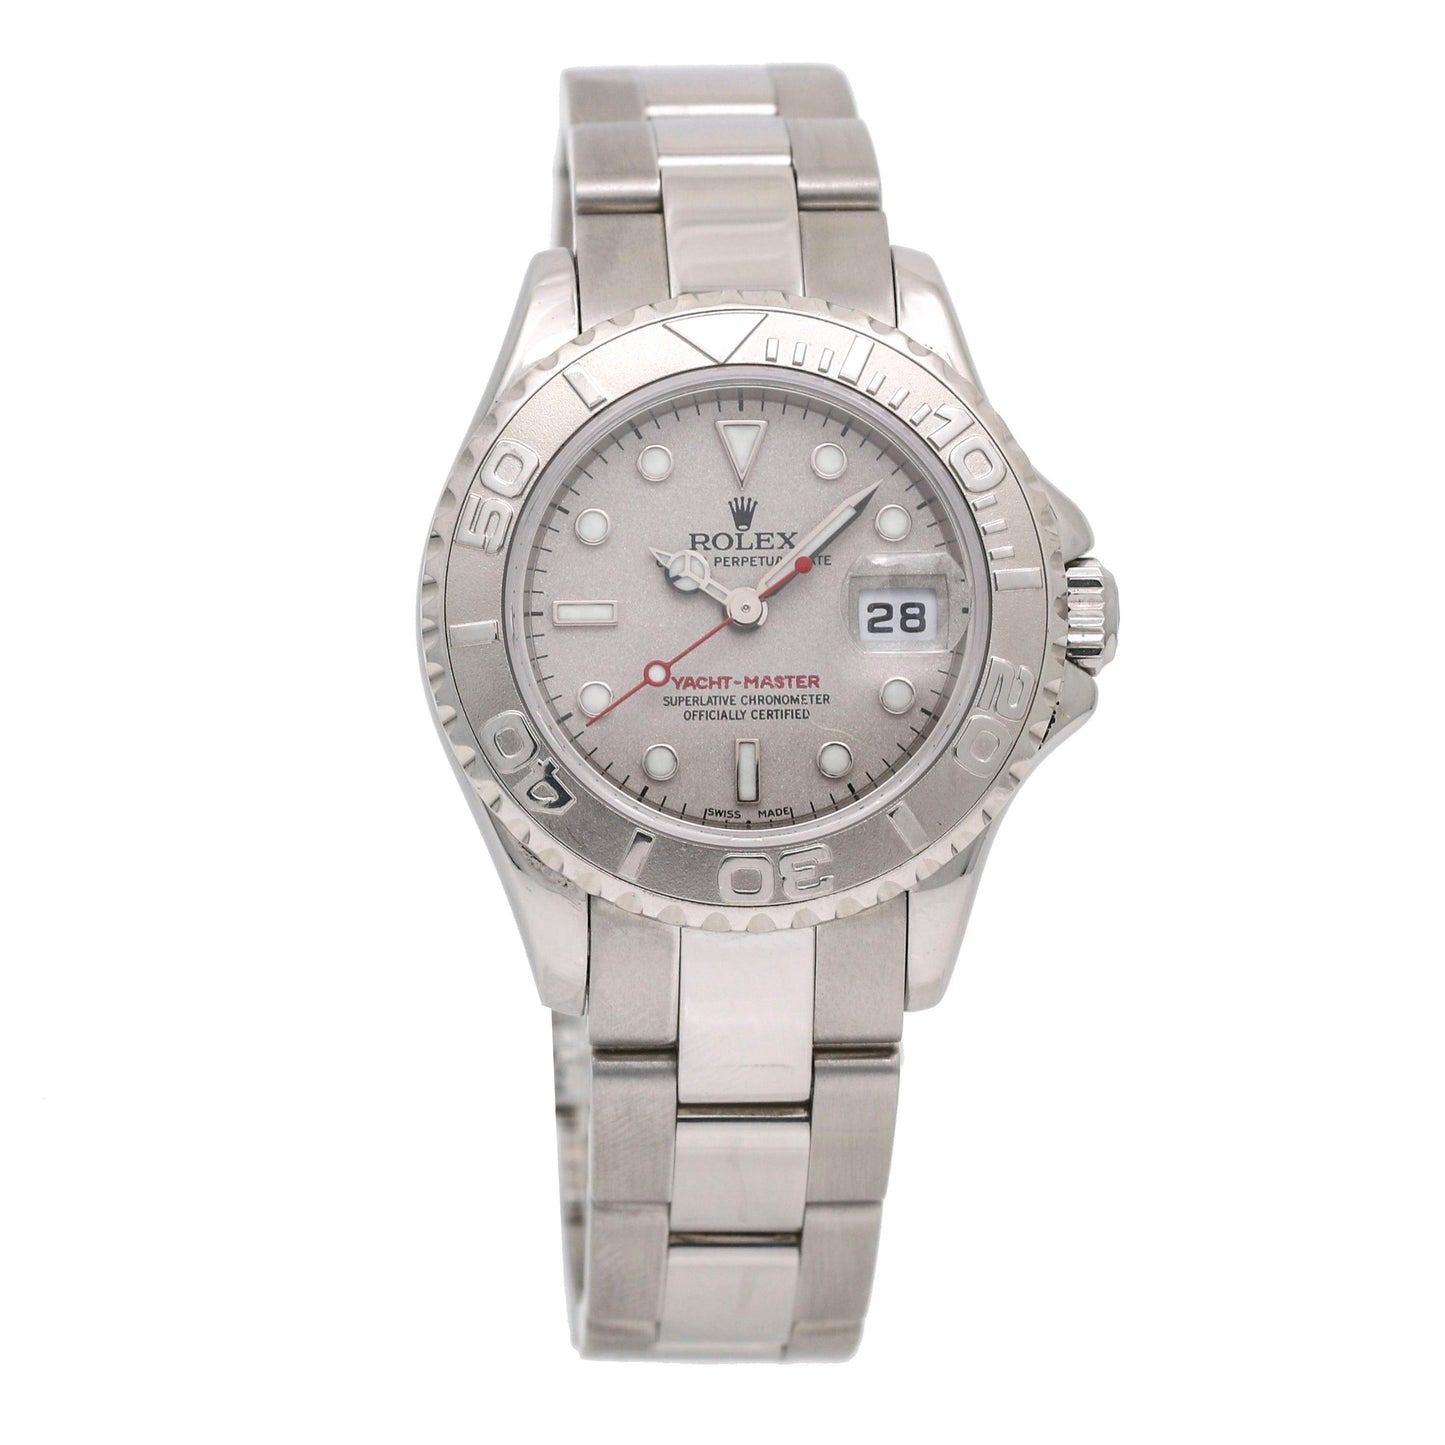 Rolex Lady Yacht Master Watch in Stainless Steel 169622 - 31 Jewels Inc.